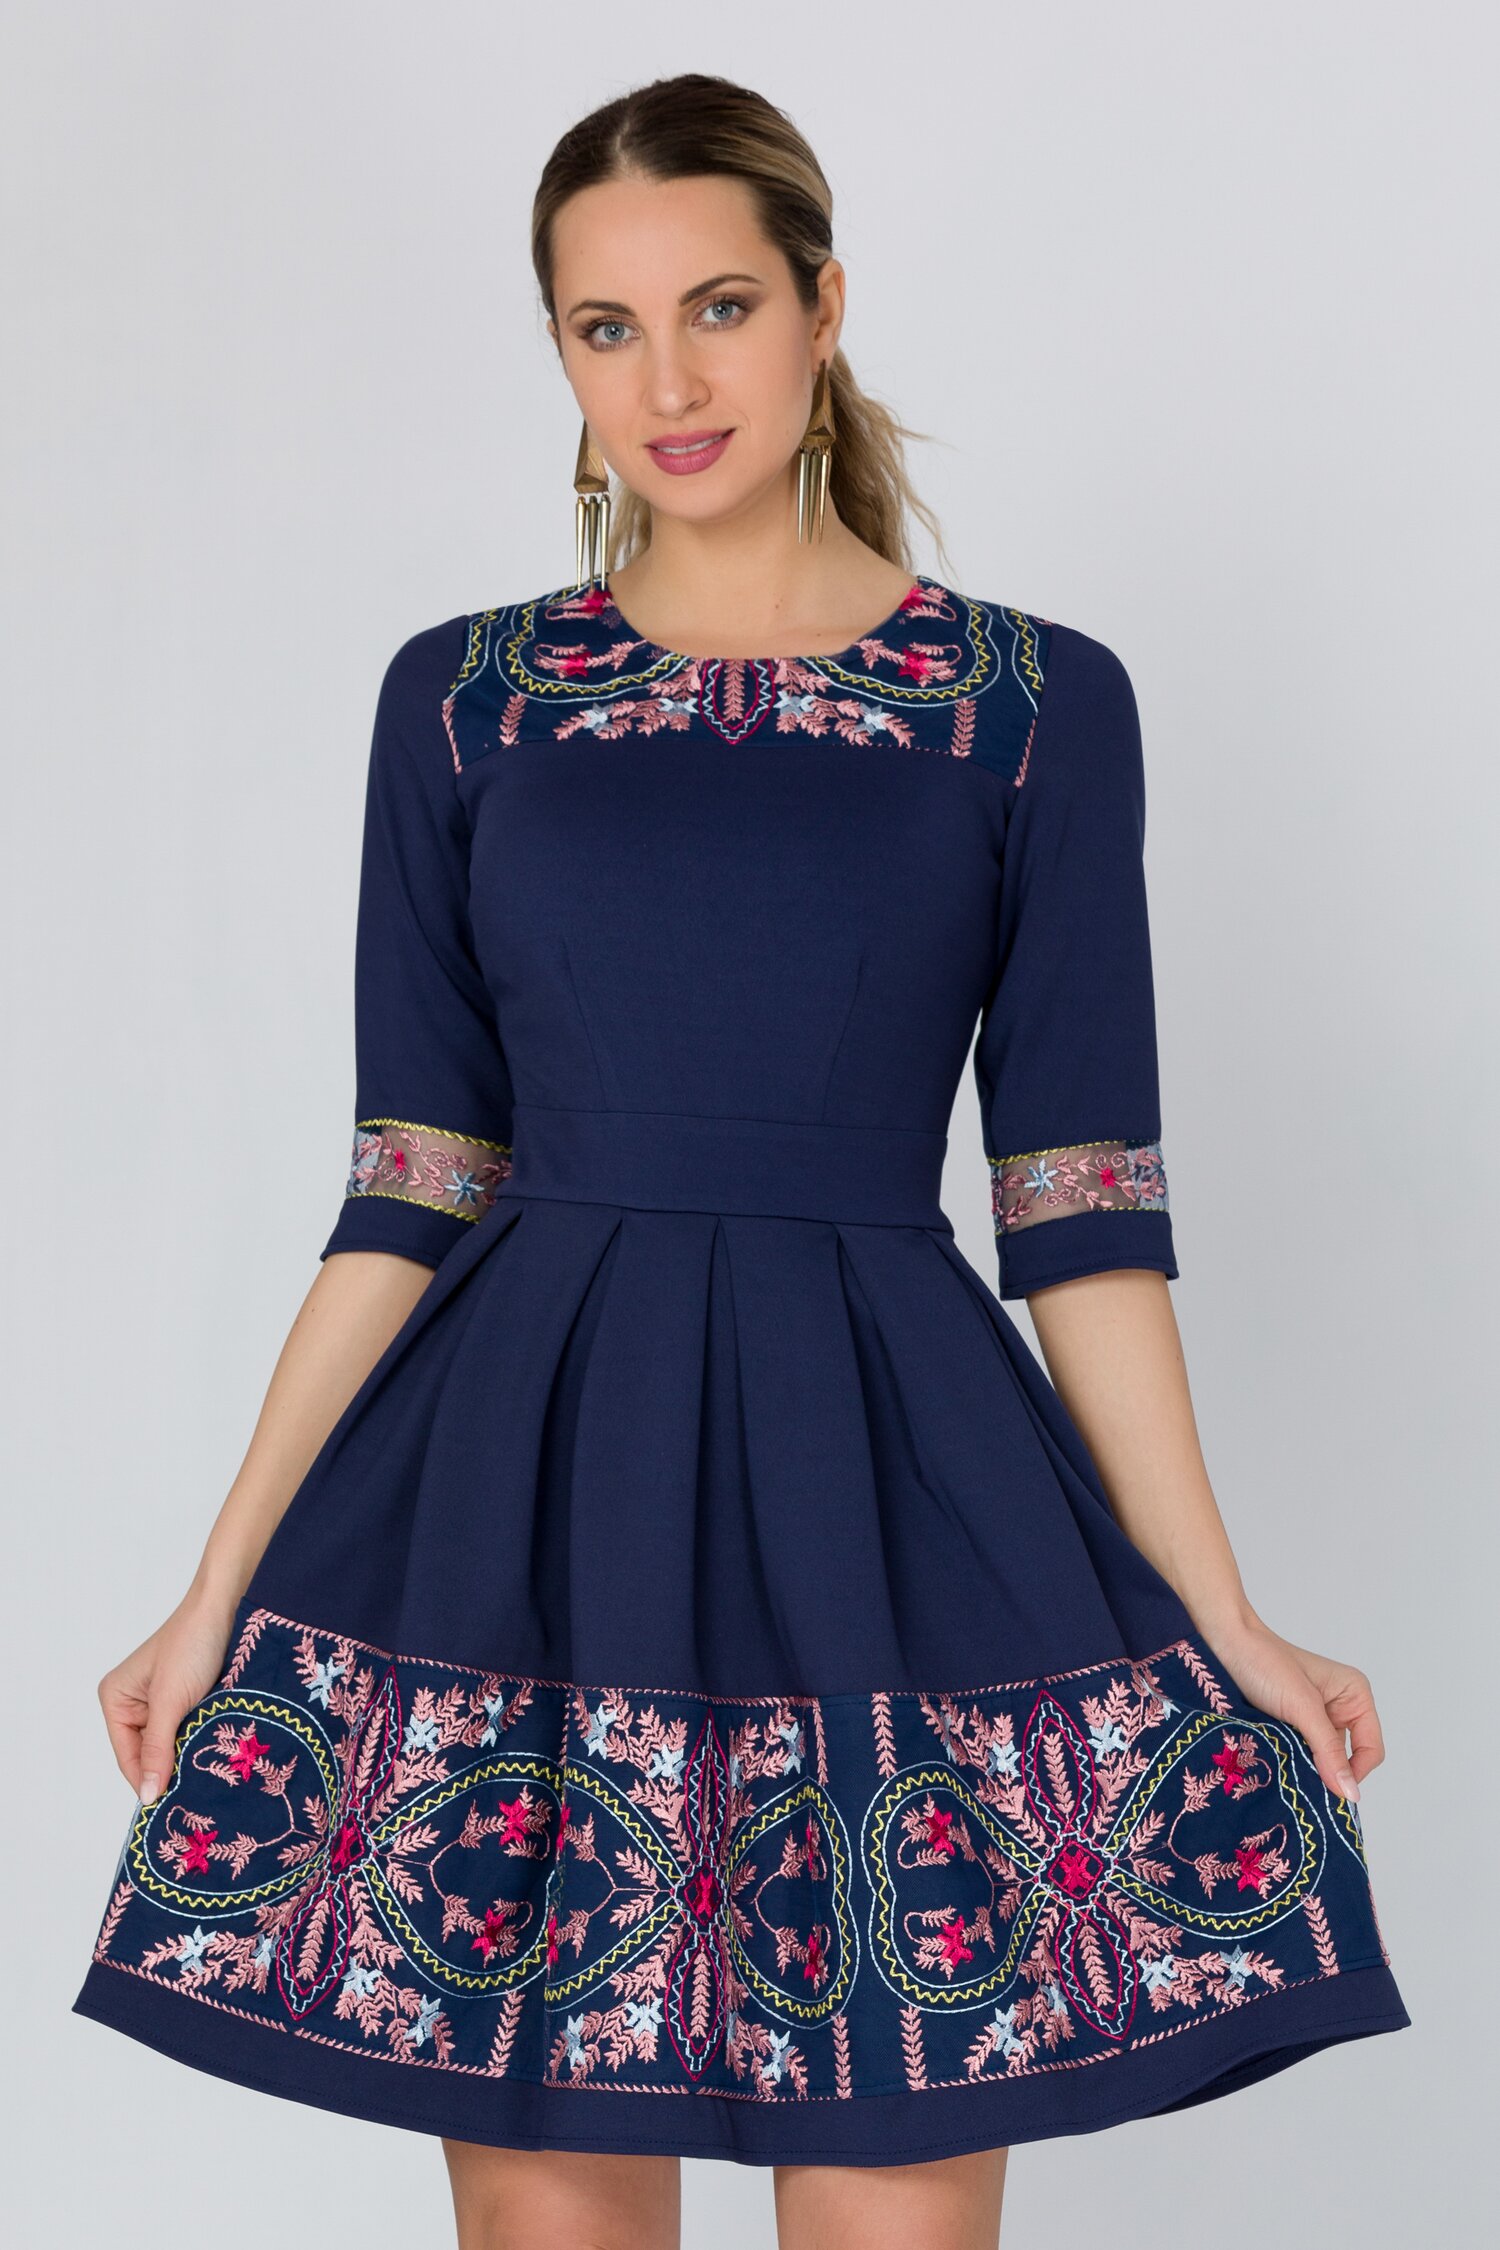 Rochie Angy bleumarin cu broderie florala